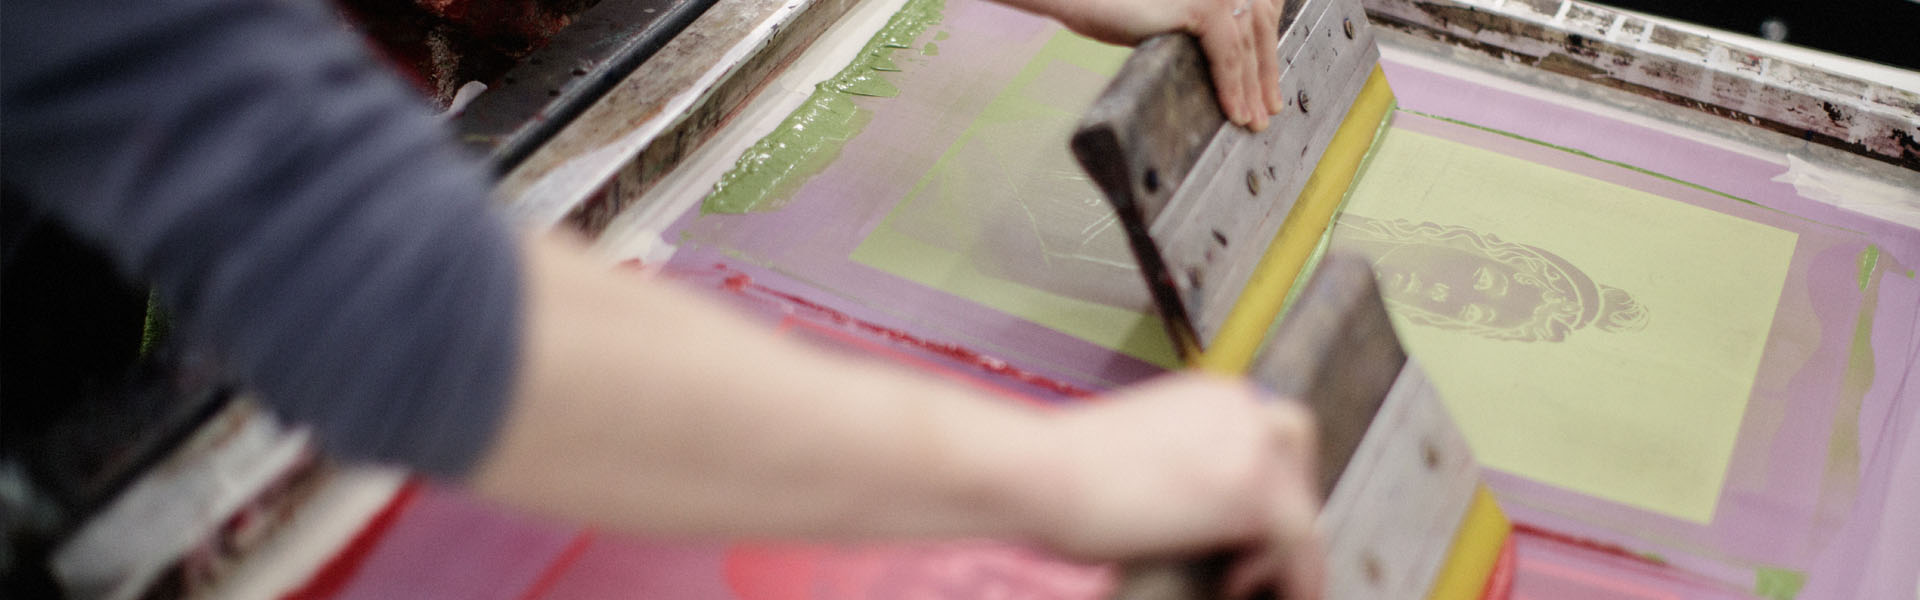 A student creating a piece of print work in class at TUDublin